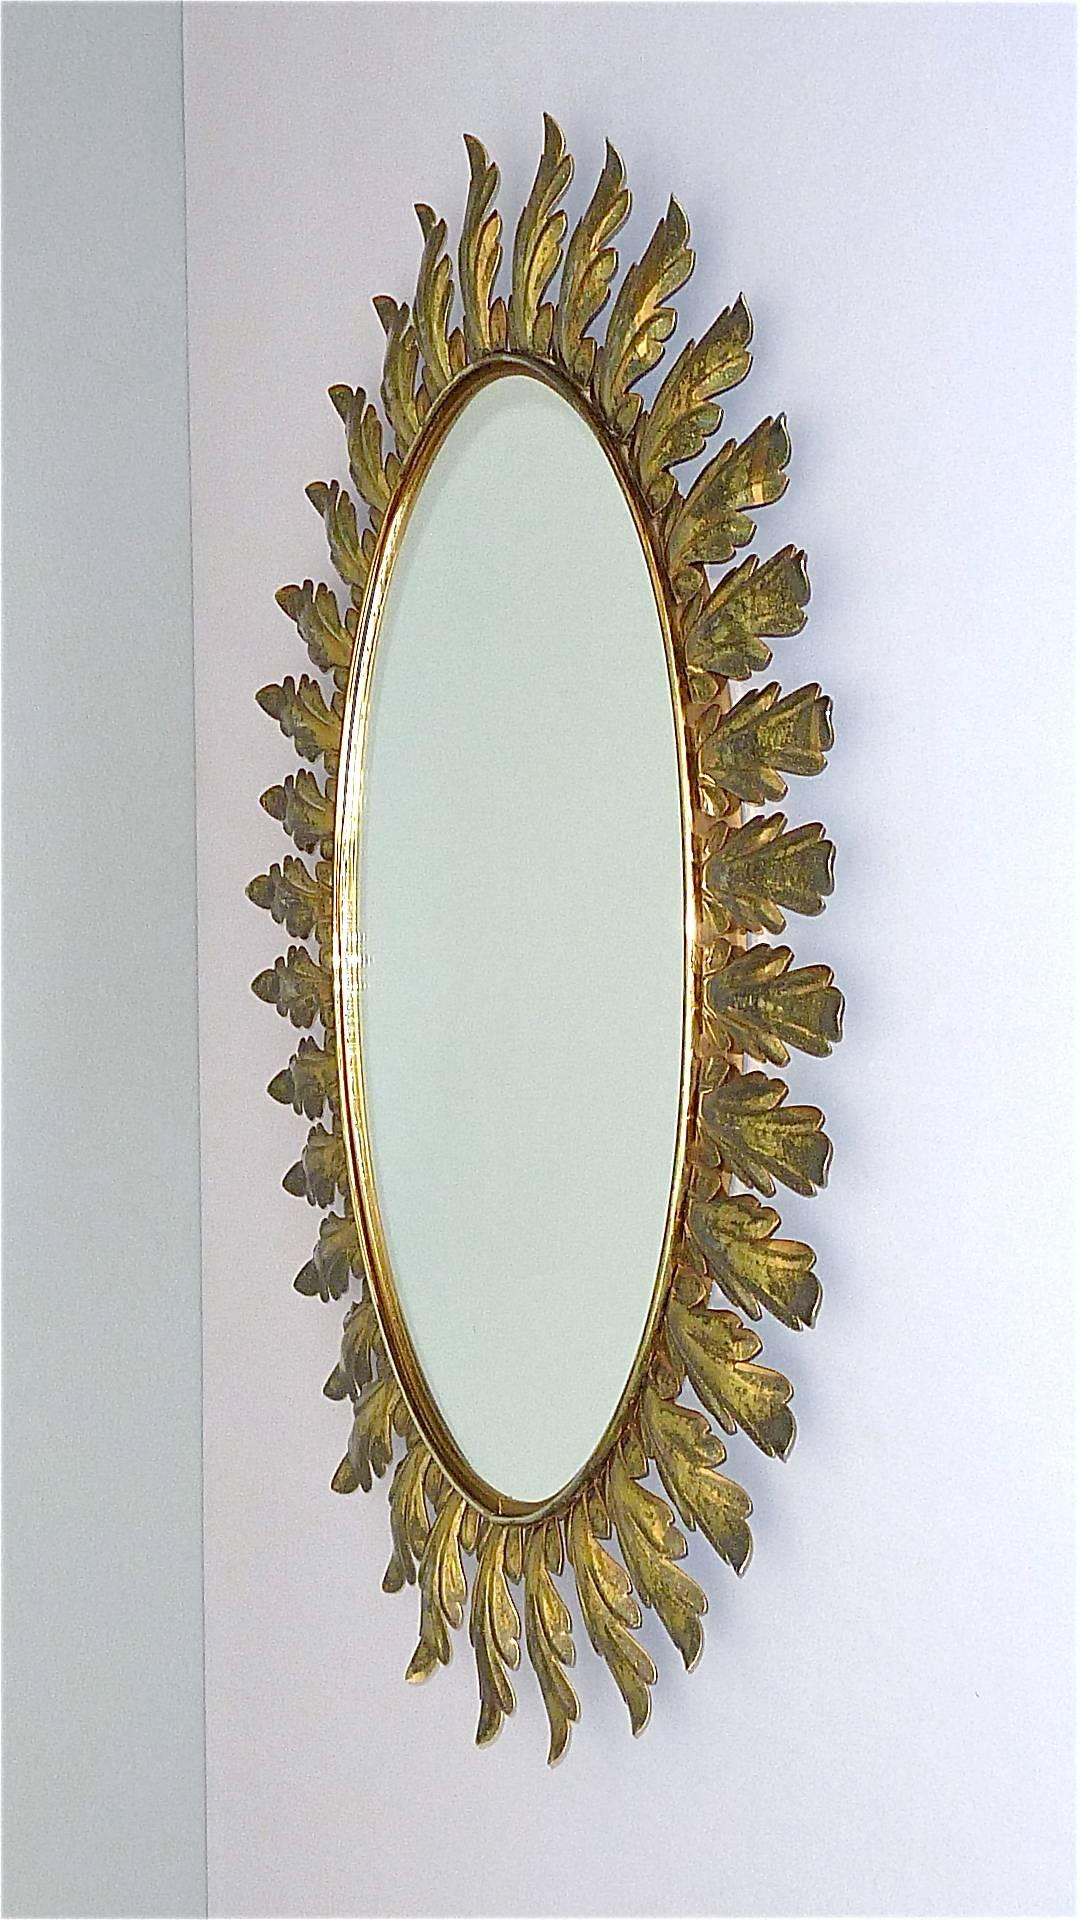 Large and fabulous of vintage Midcentury starburst sunburst wall mirror made in Belgium around 1950. The big oval mirror is made of patinated brass and brass sheet metal mounted on a wood base with a still remaining paper label which reads Made in